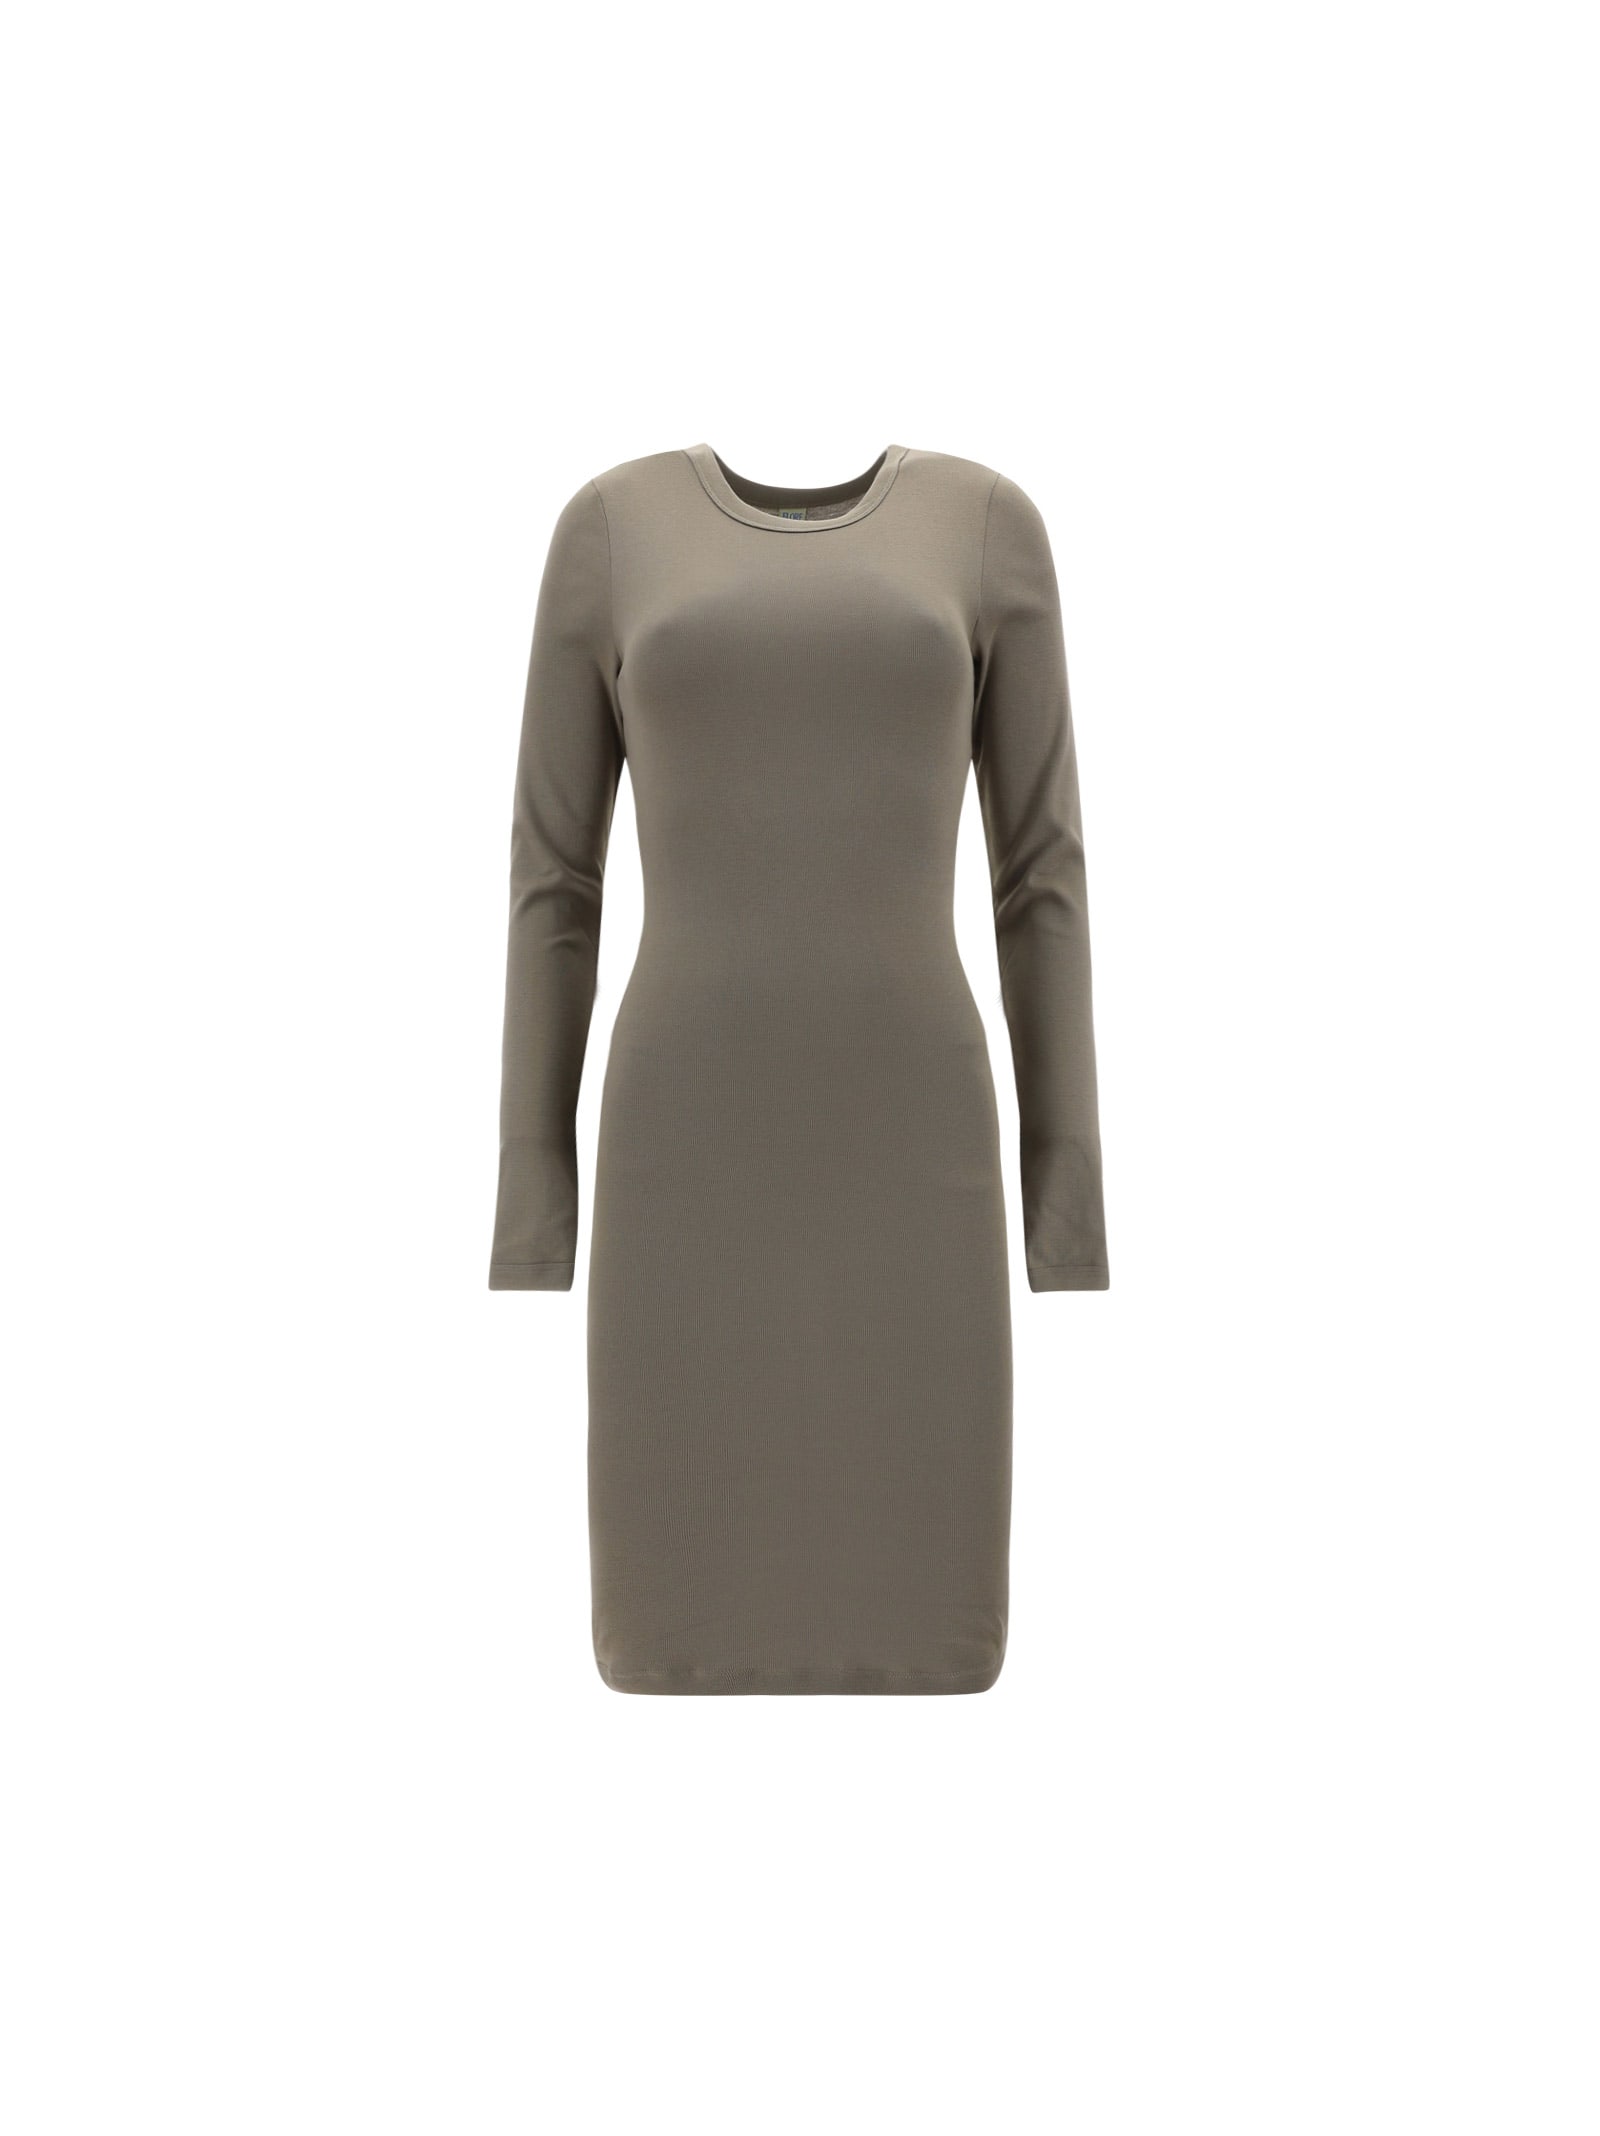 Flore Flore Max Dress In Taupe